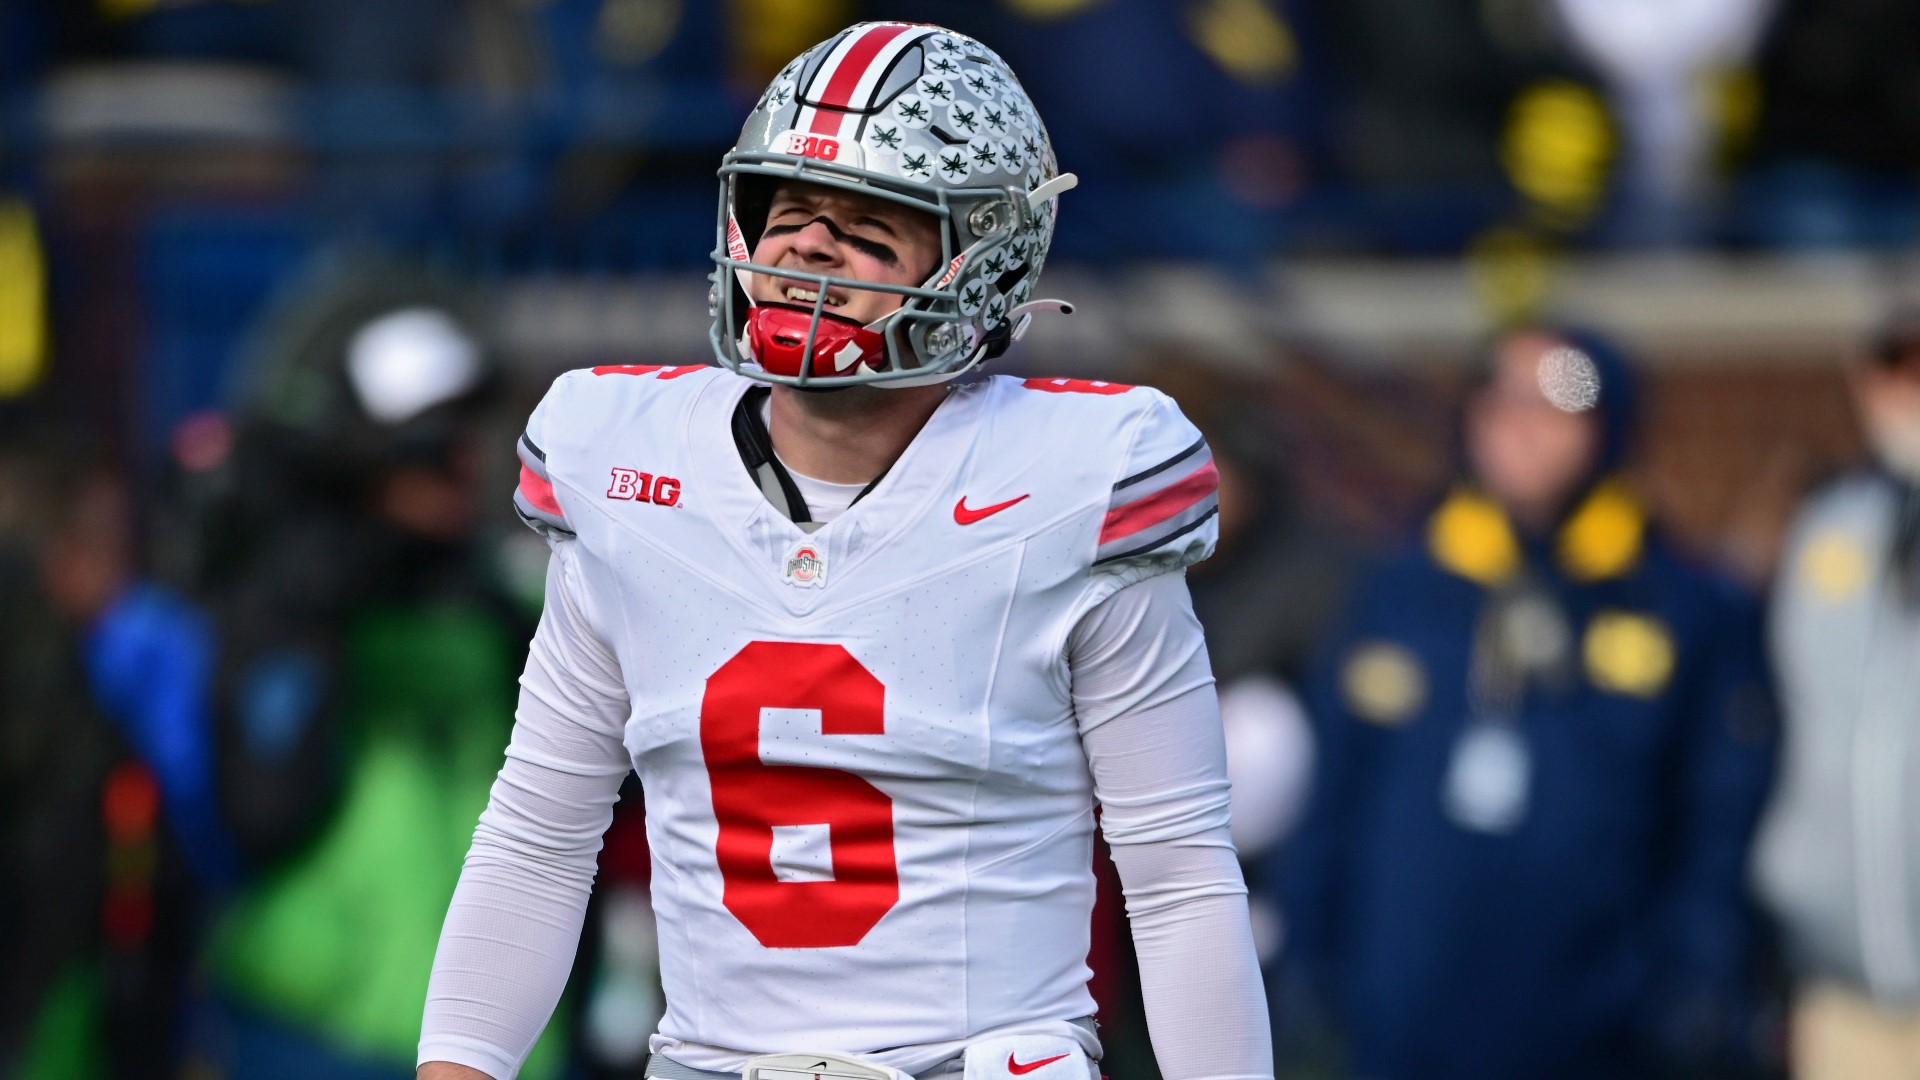 Ohio State bowl game predictions: Where the Buckeyes could play